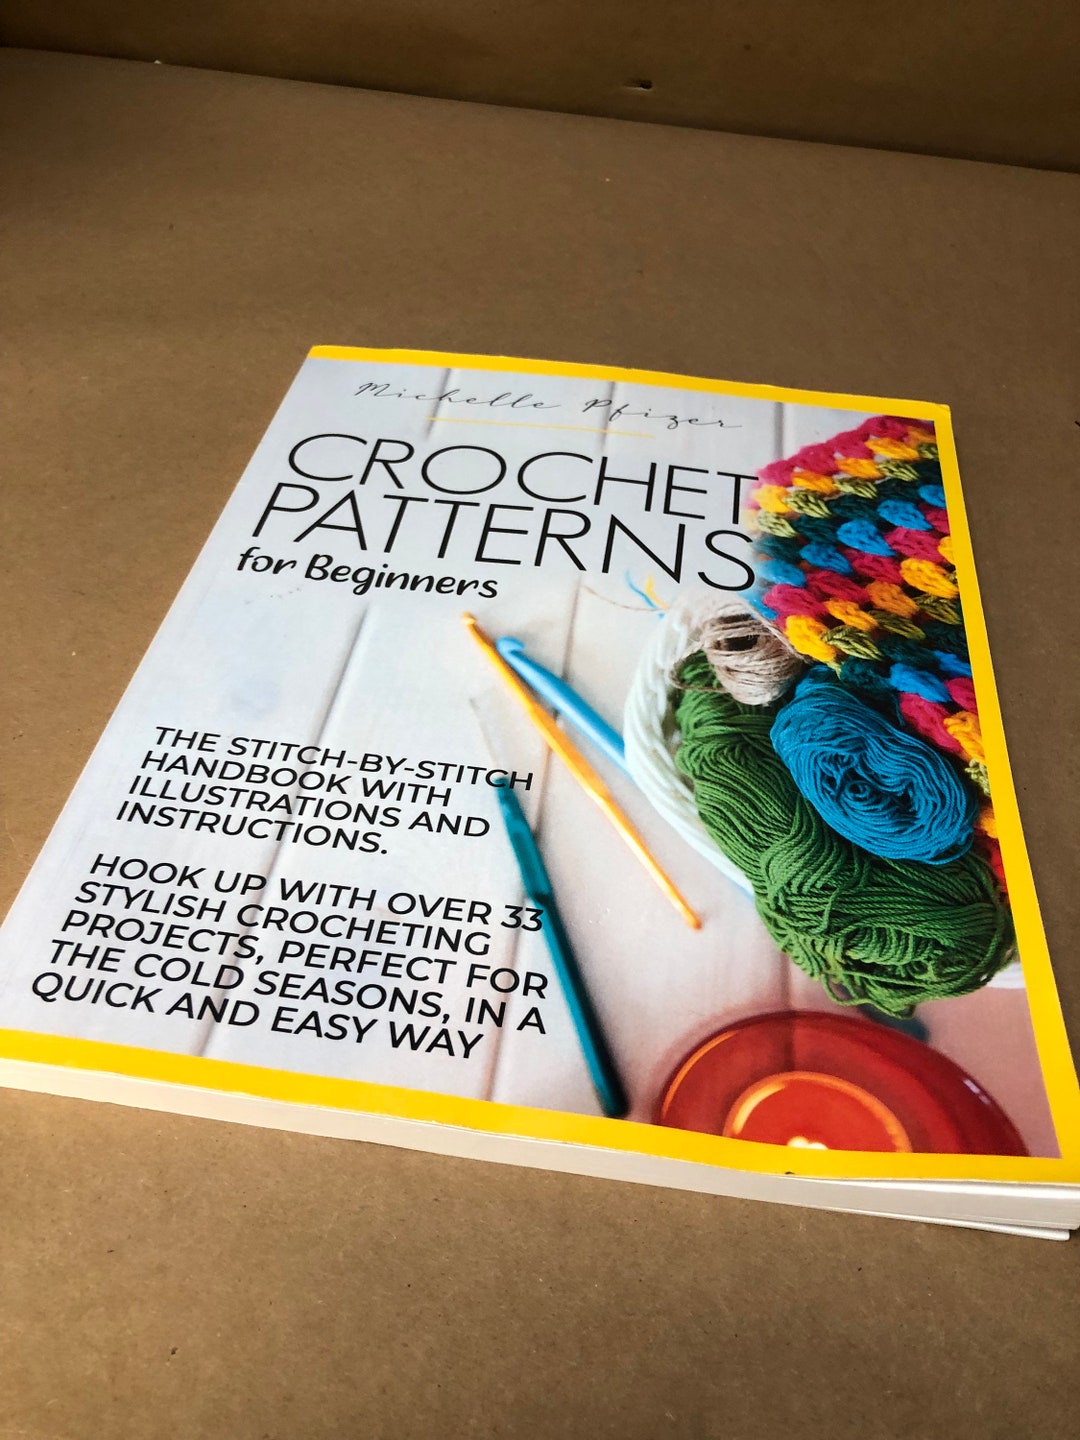 Crochet: Crochet for Beginners: The Ultimate Step by Step Guide with Illustrations and Pictures! [Book]